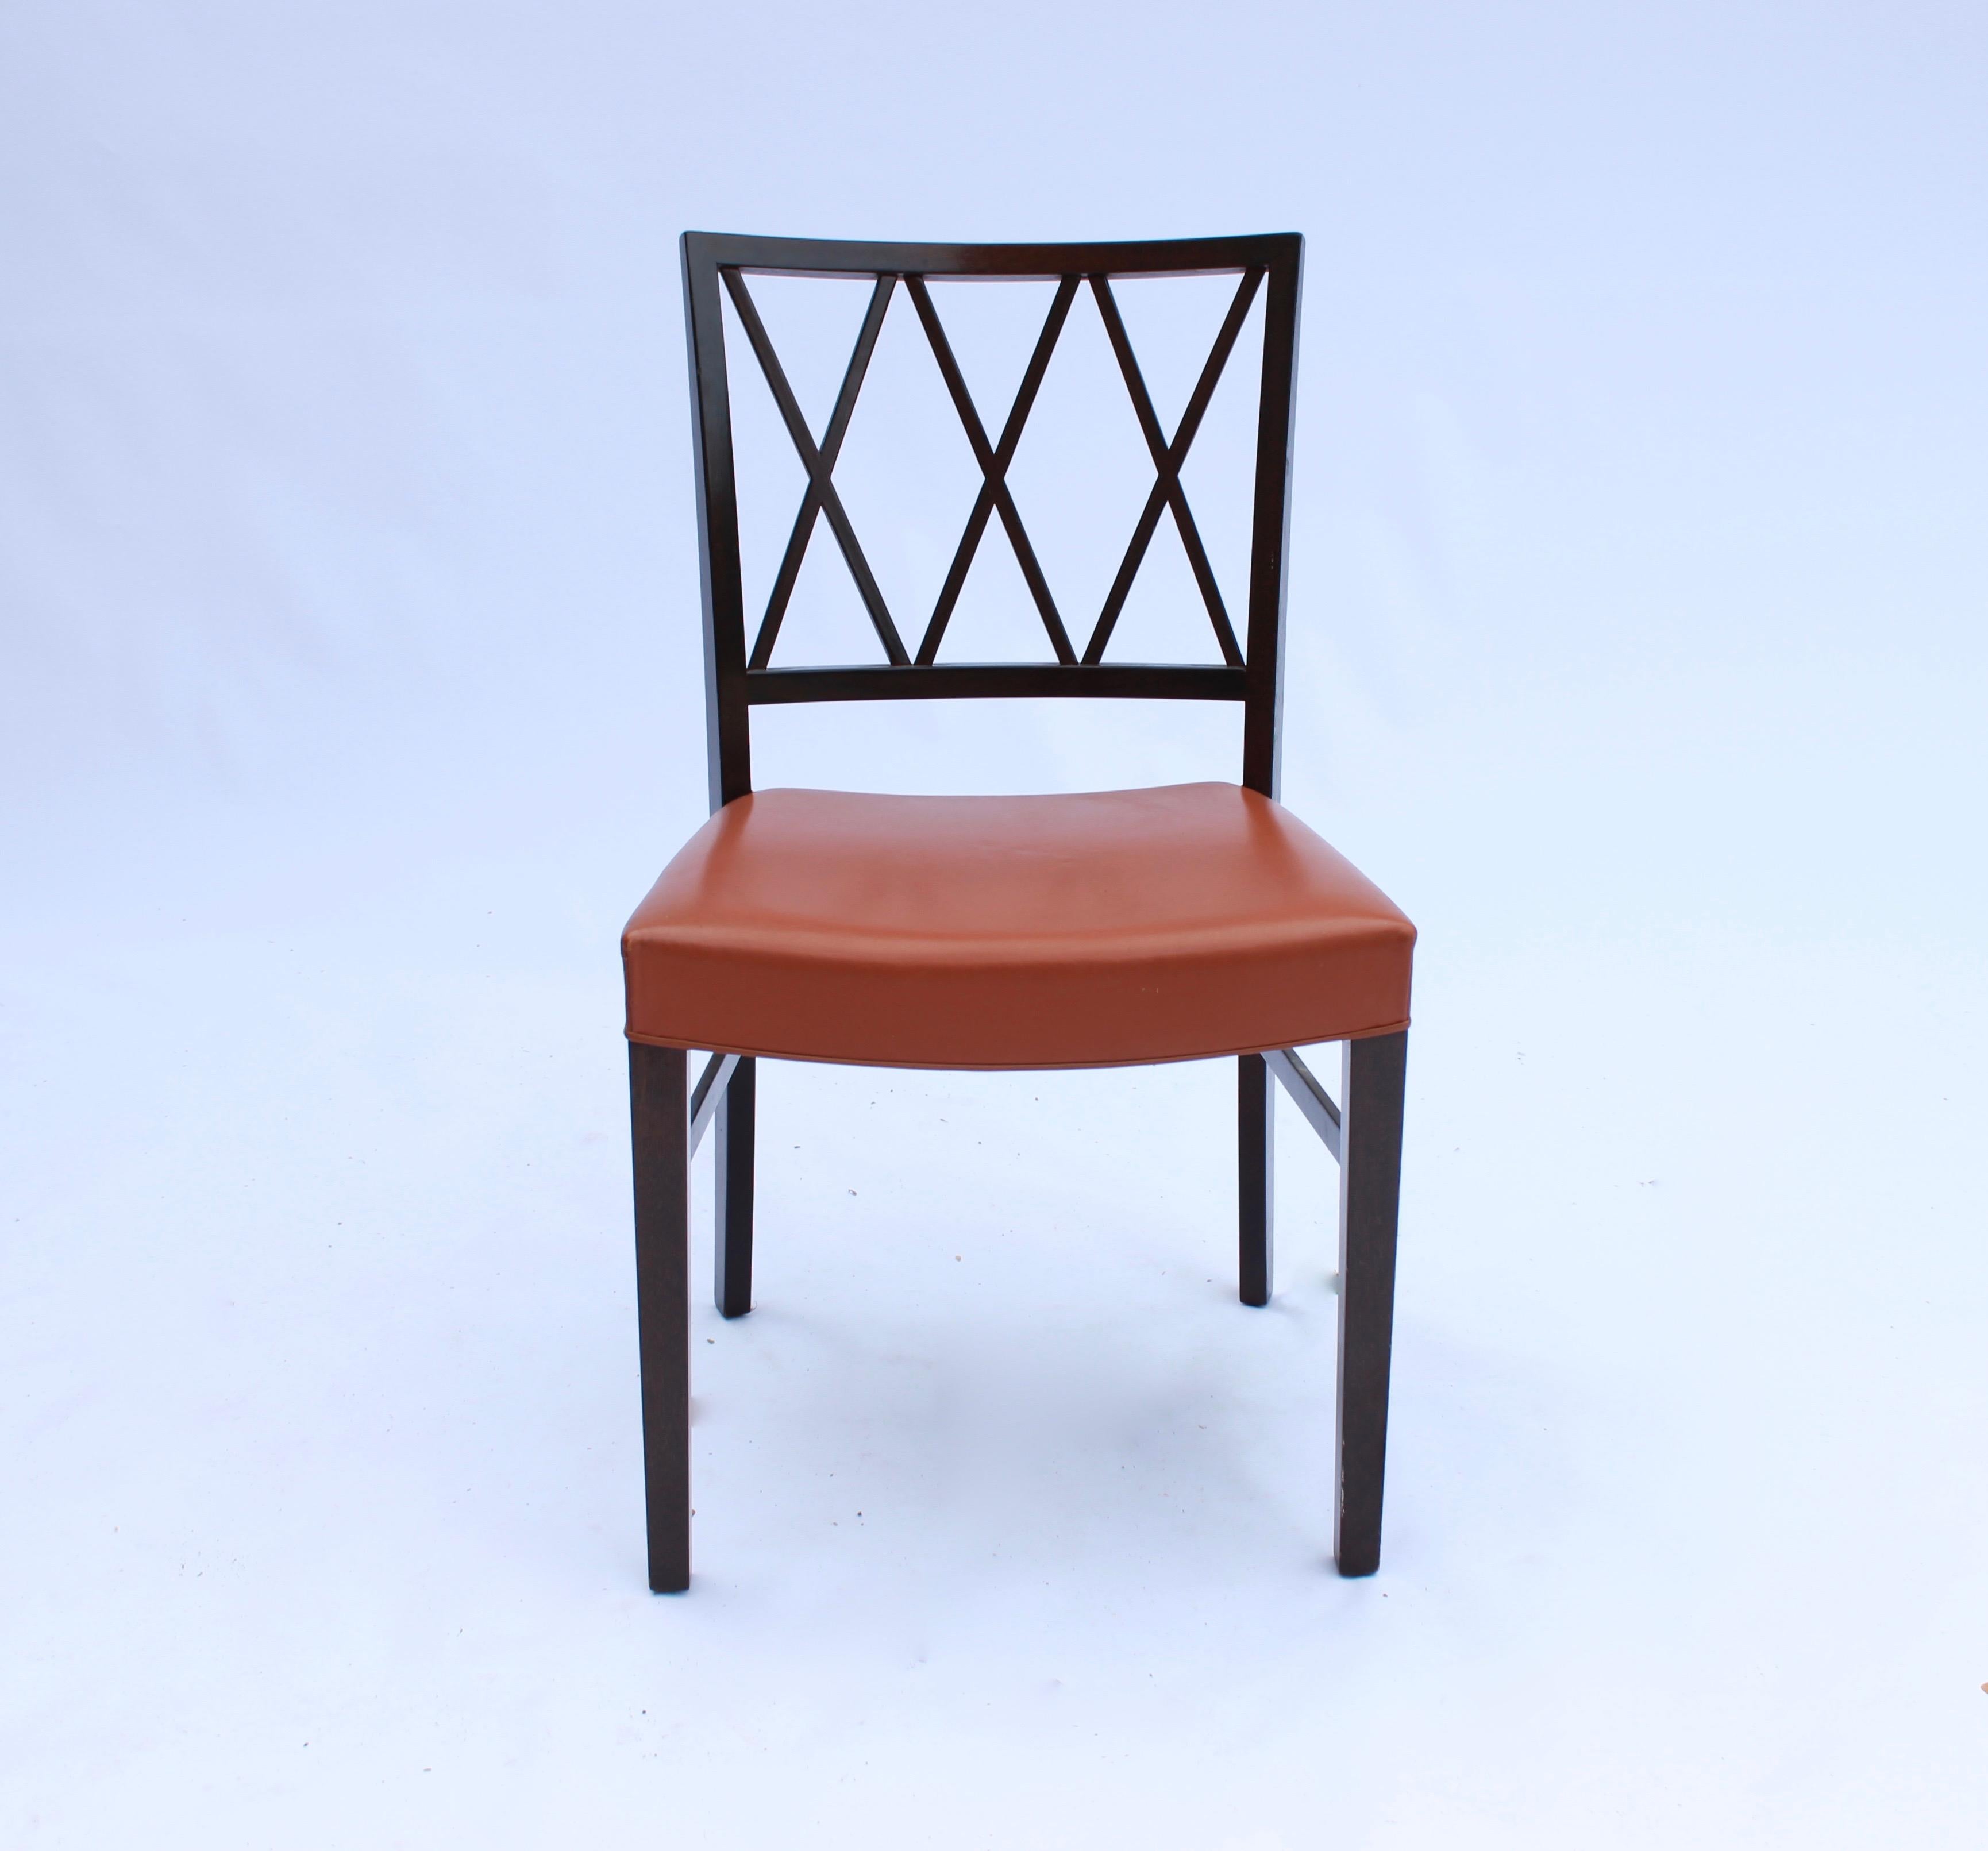 Set of 6 dining chairs in dark mahogany and cognac colored leather designed by Ole Wanscher from the 1960s. The chairs are in great vintage condition.